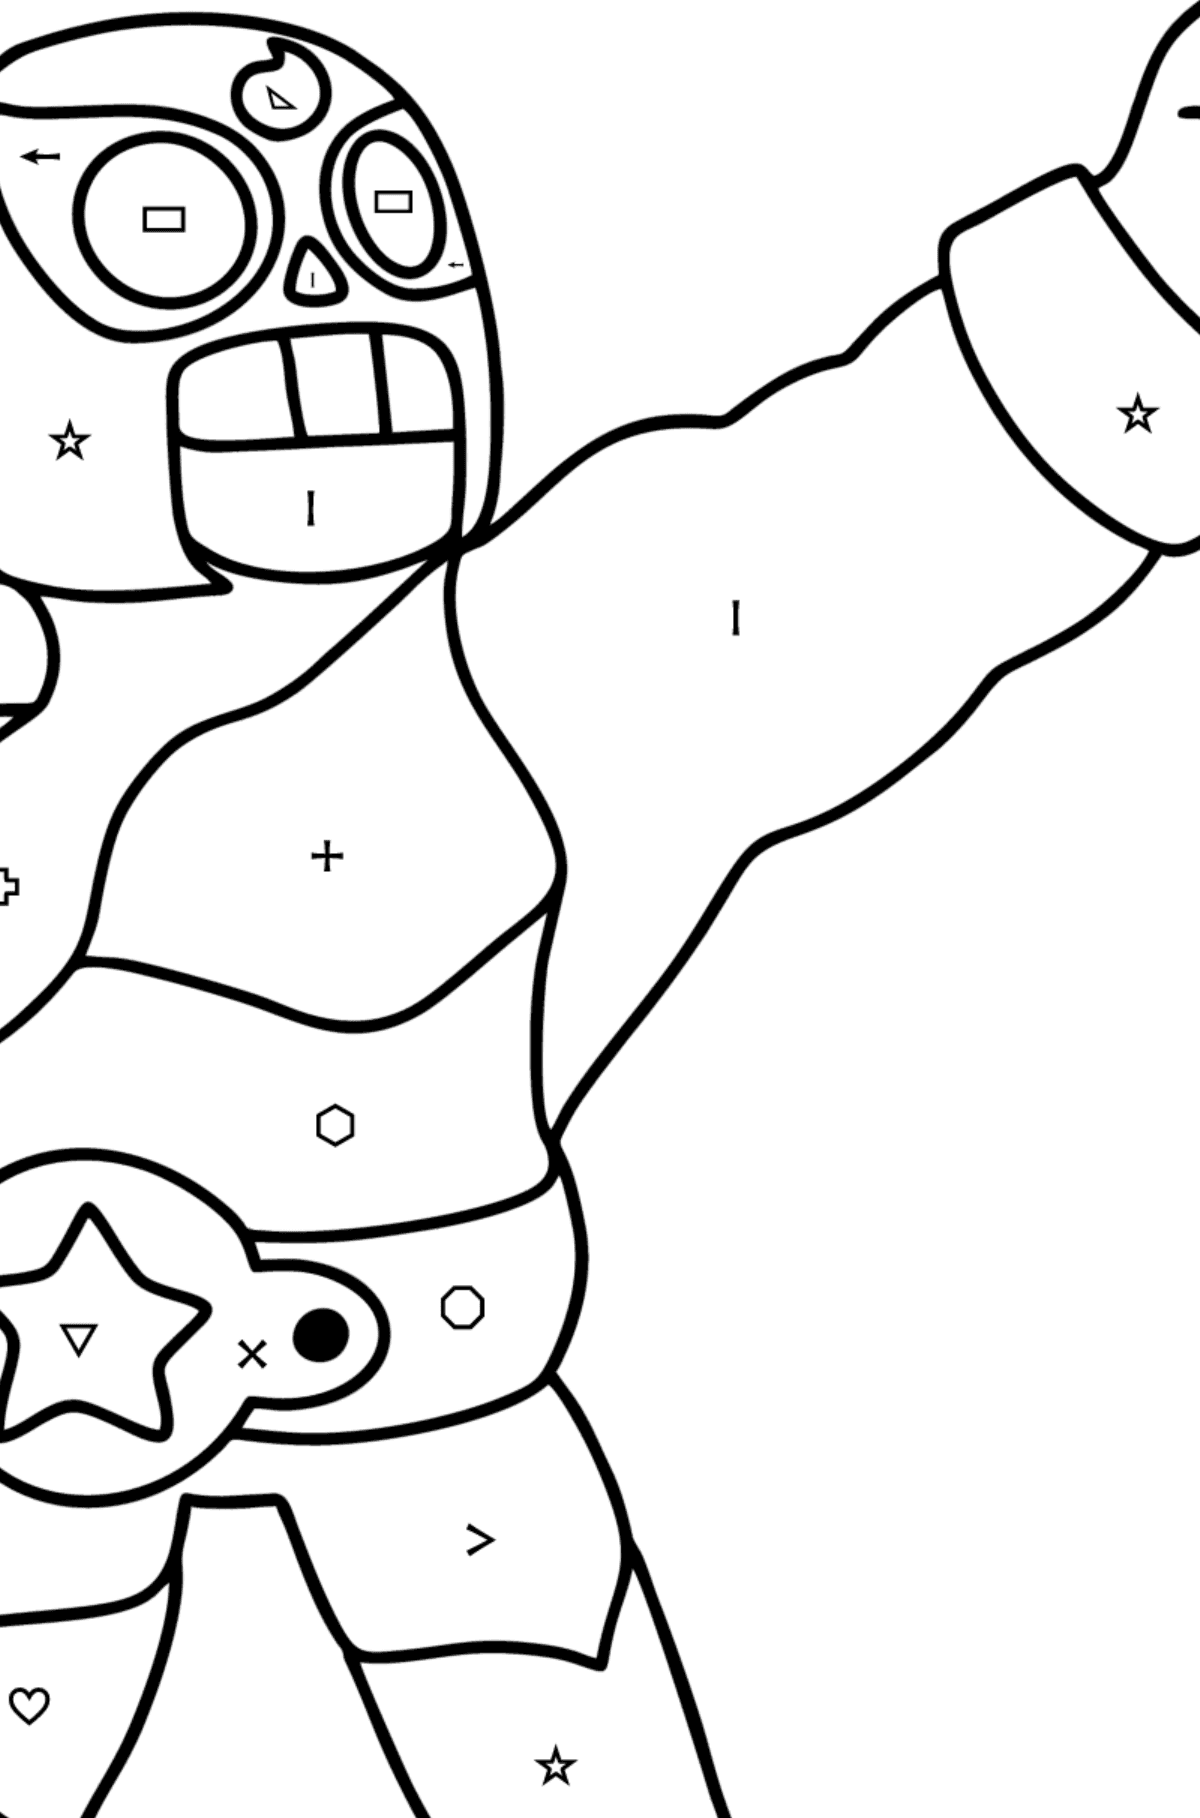 Brawl Stars El Primo coloring page - Coloring by Symbols and Geometric Shapes for Kids